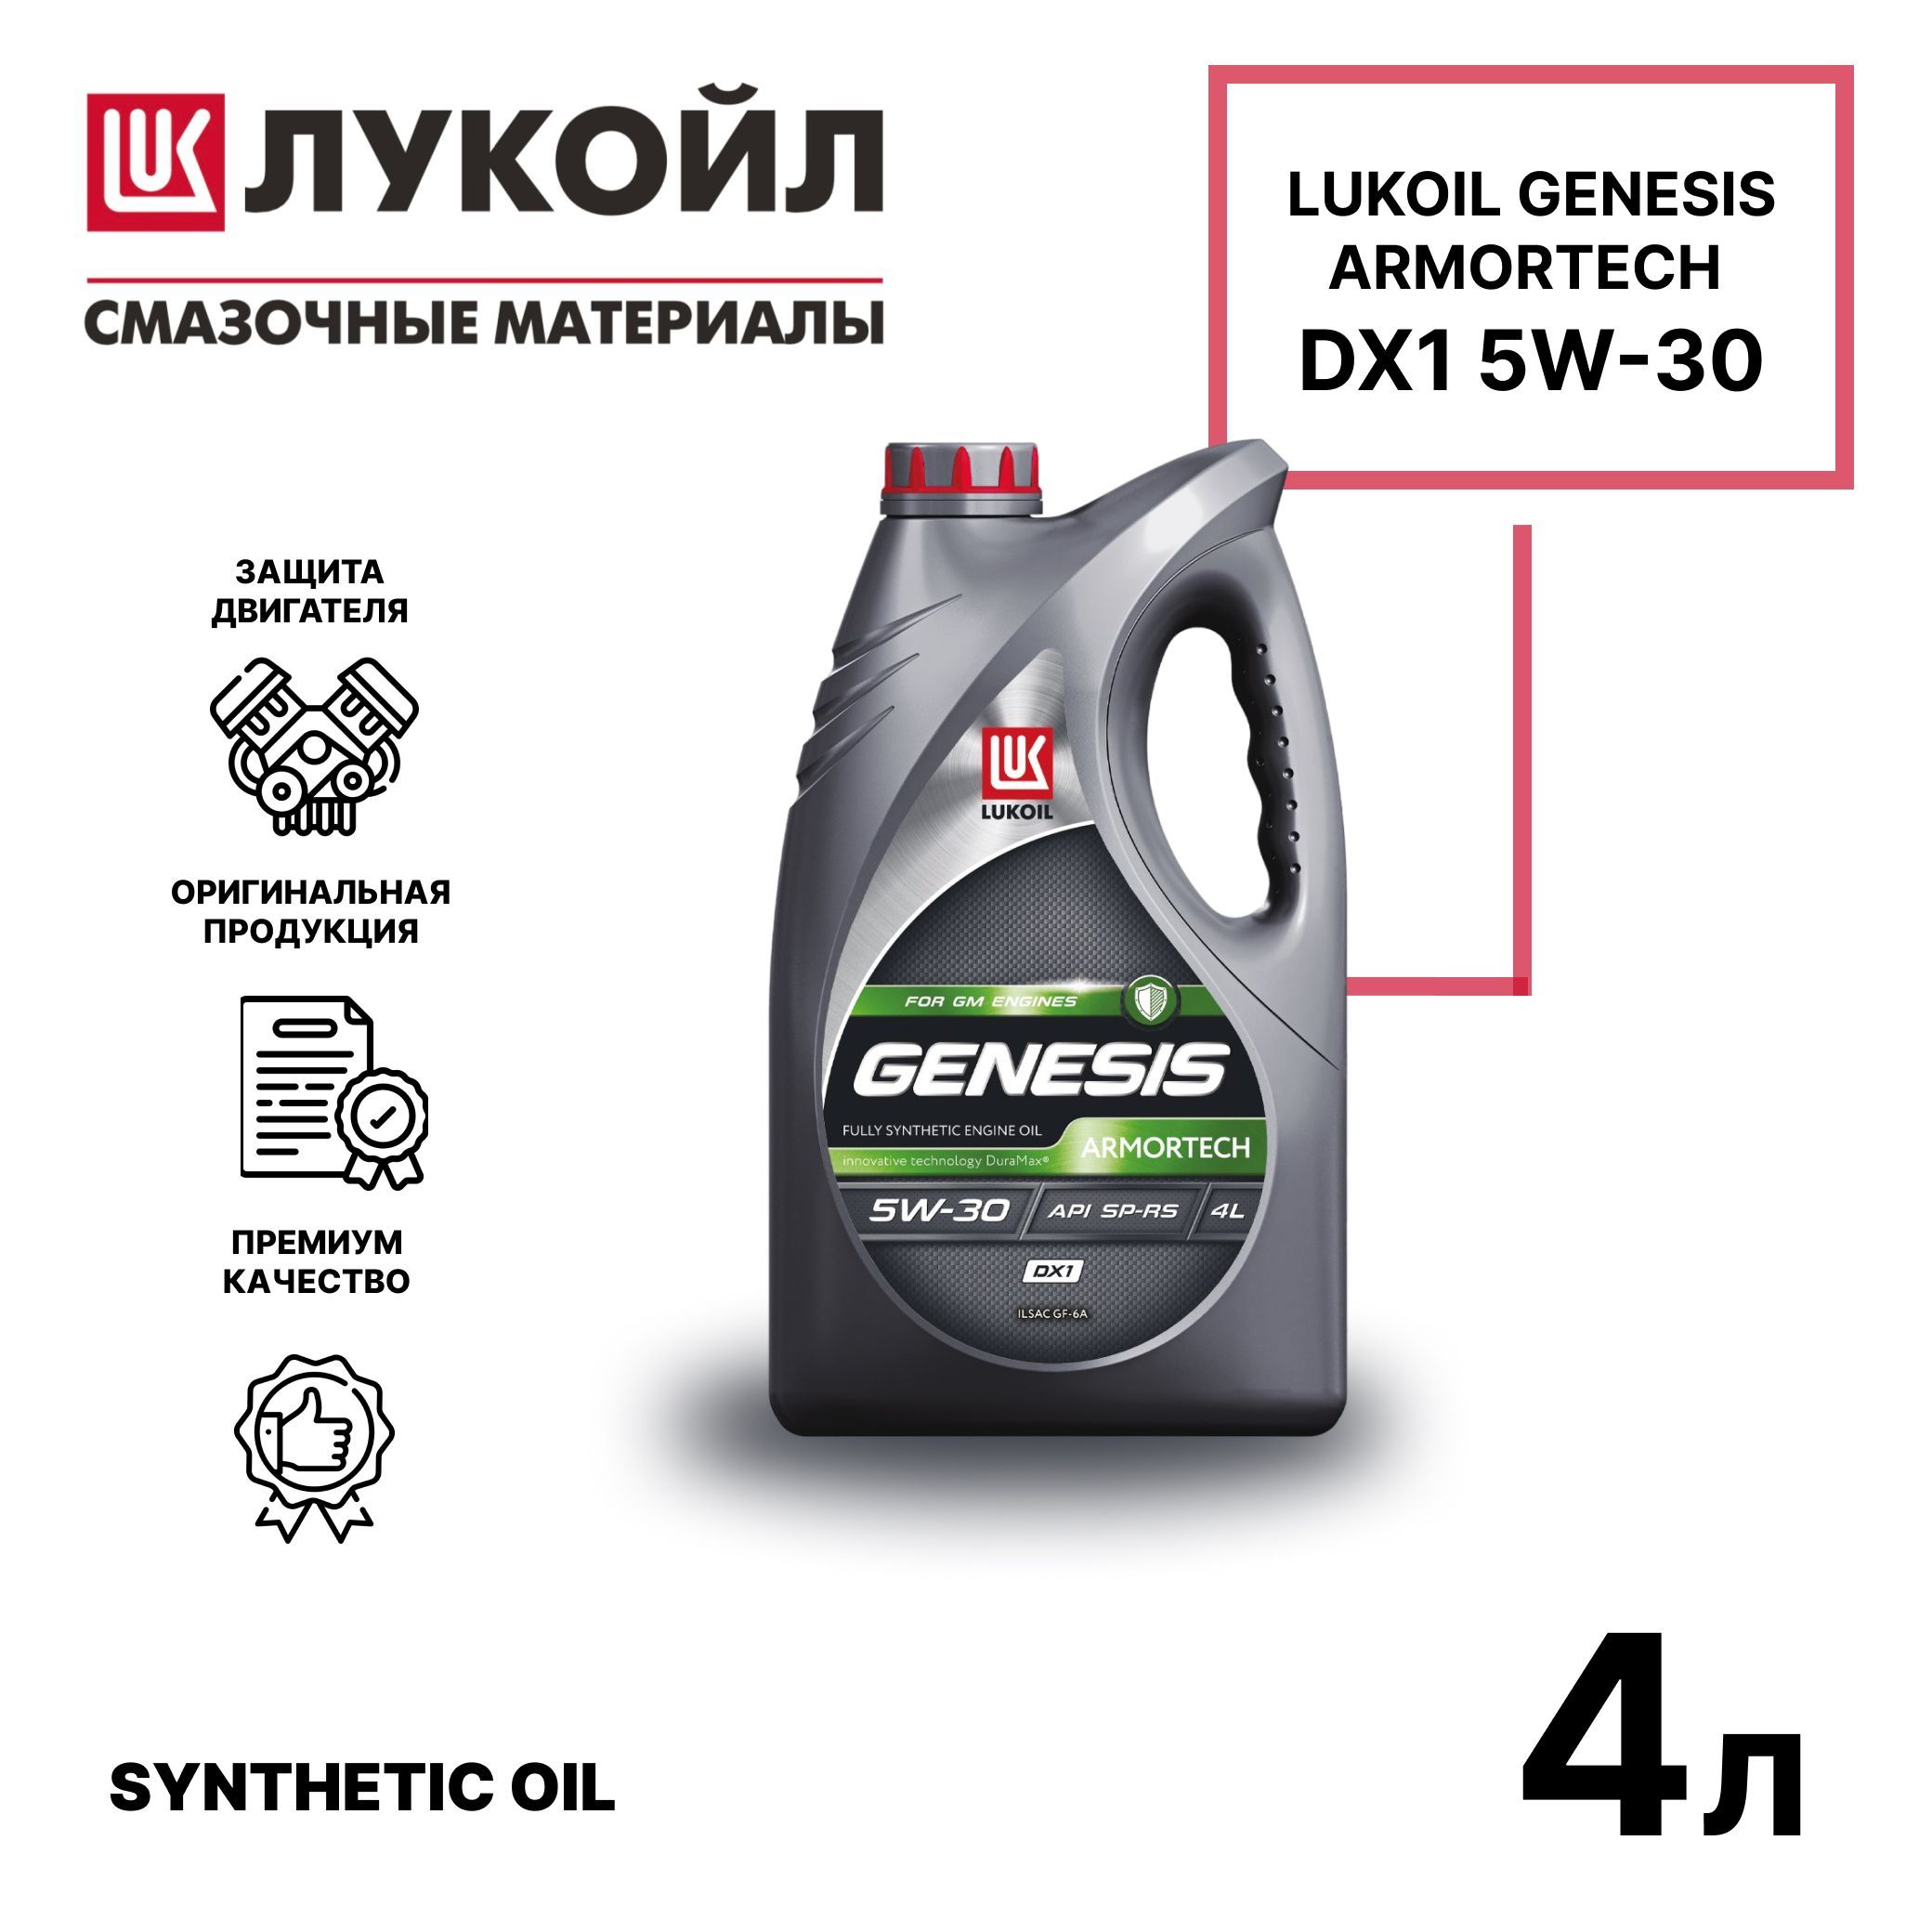 Масло лукойл dx1. Лукойл dx1 5w-30. Lukoil dx1.